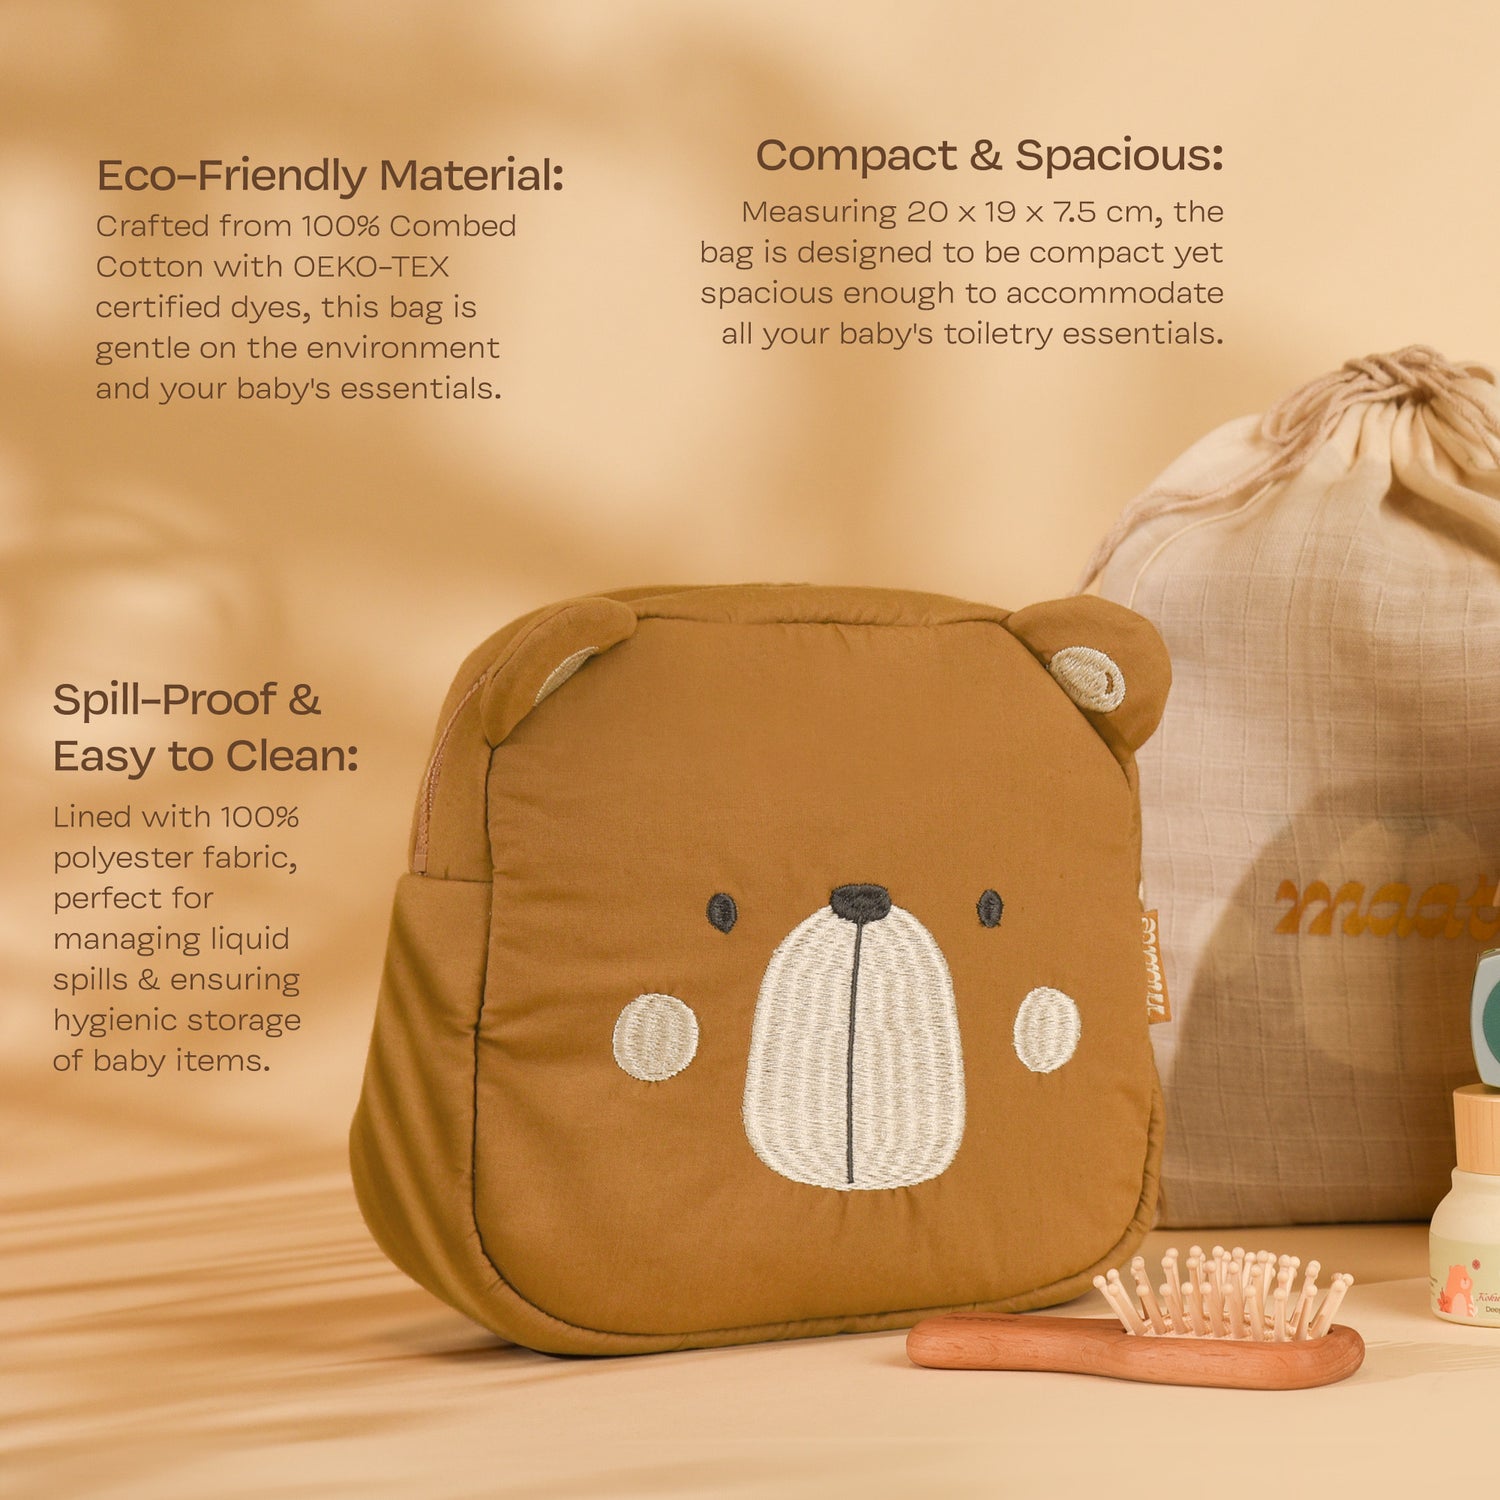 Cotton Toiletry Bag for Baby &amp; Kids - Brown